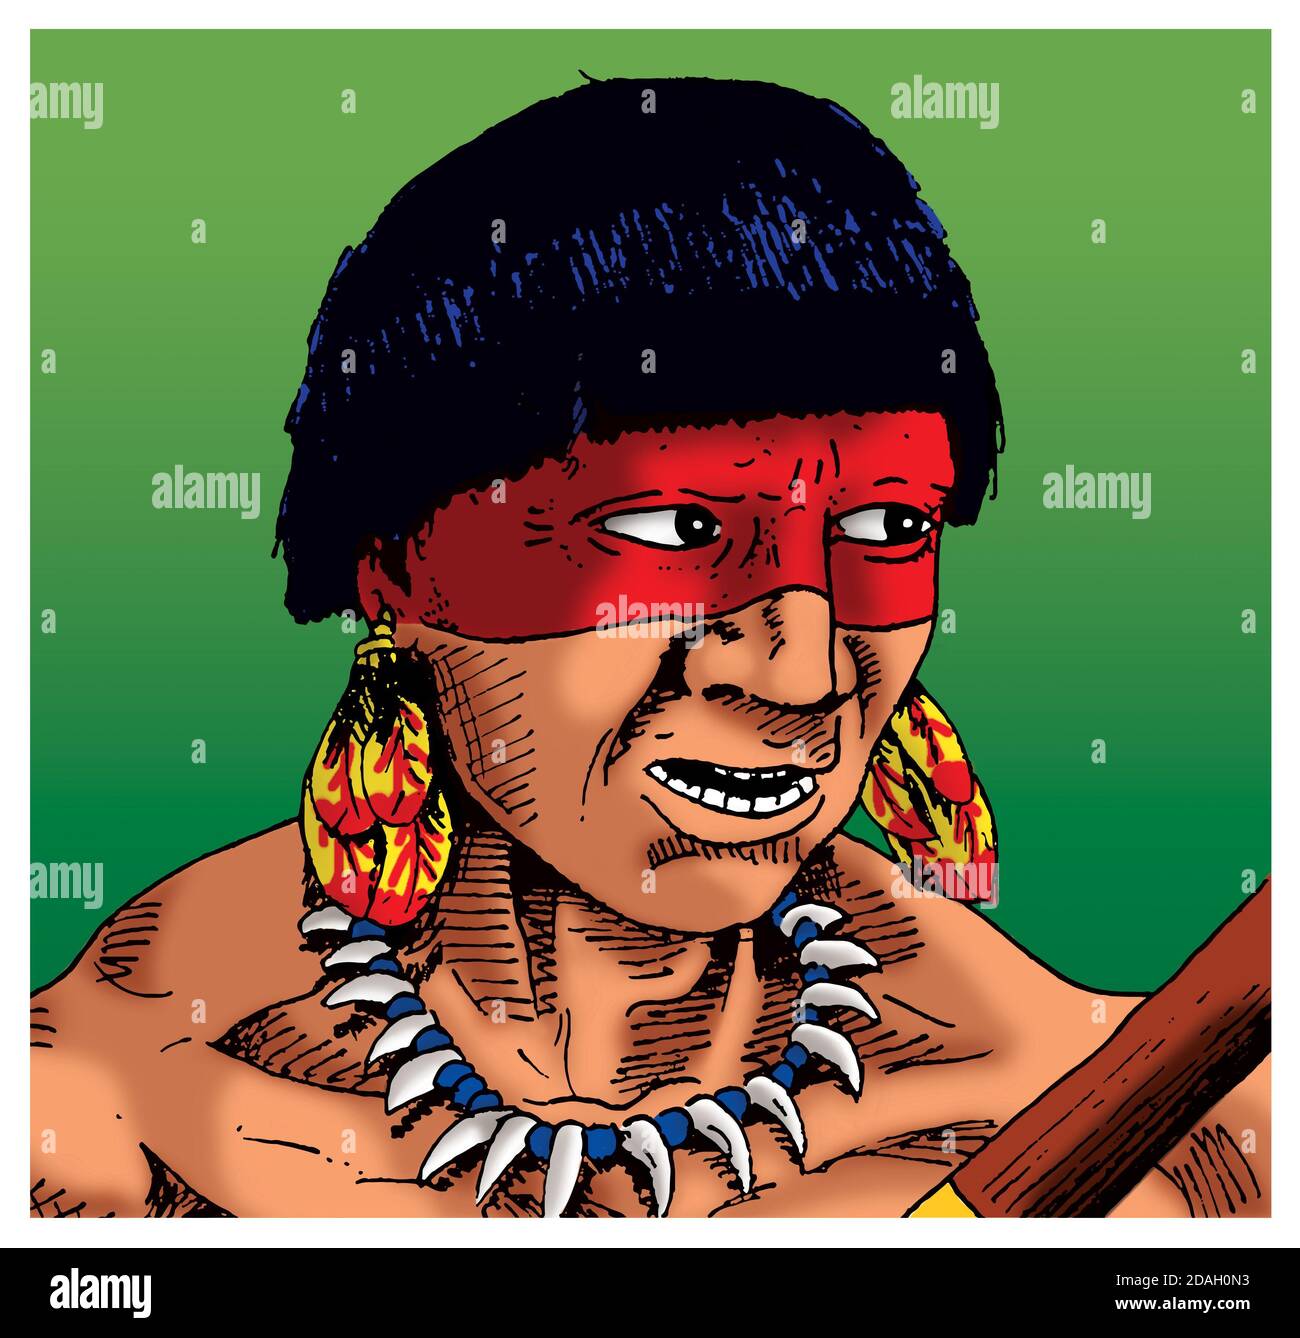 Brazilian indigenous man looking to the side with face paintings and accessories, in comics style. Hand drawn and digital colorization. Stock Photo